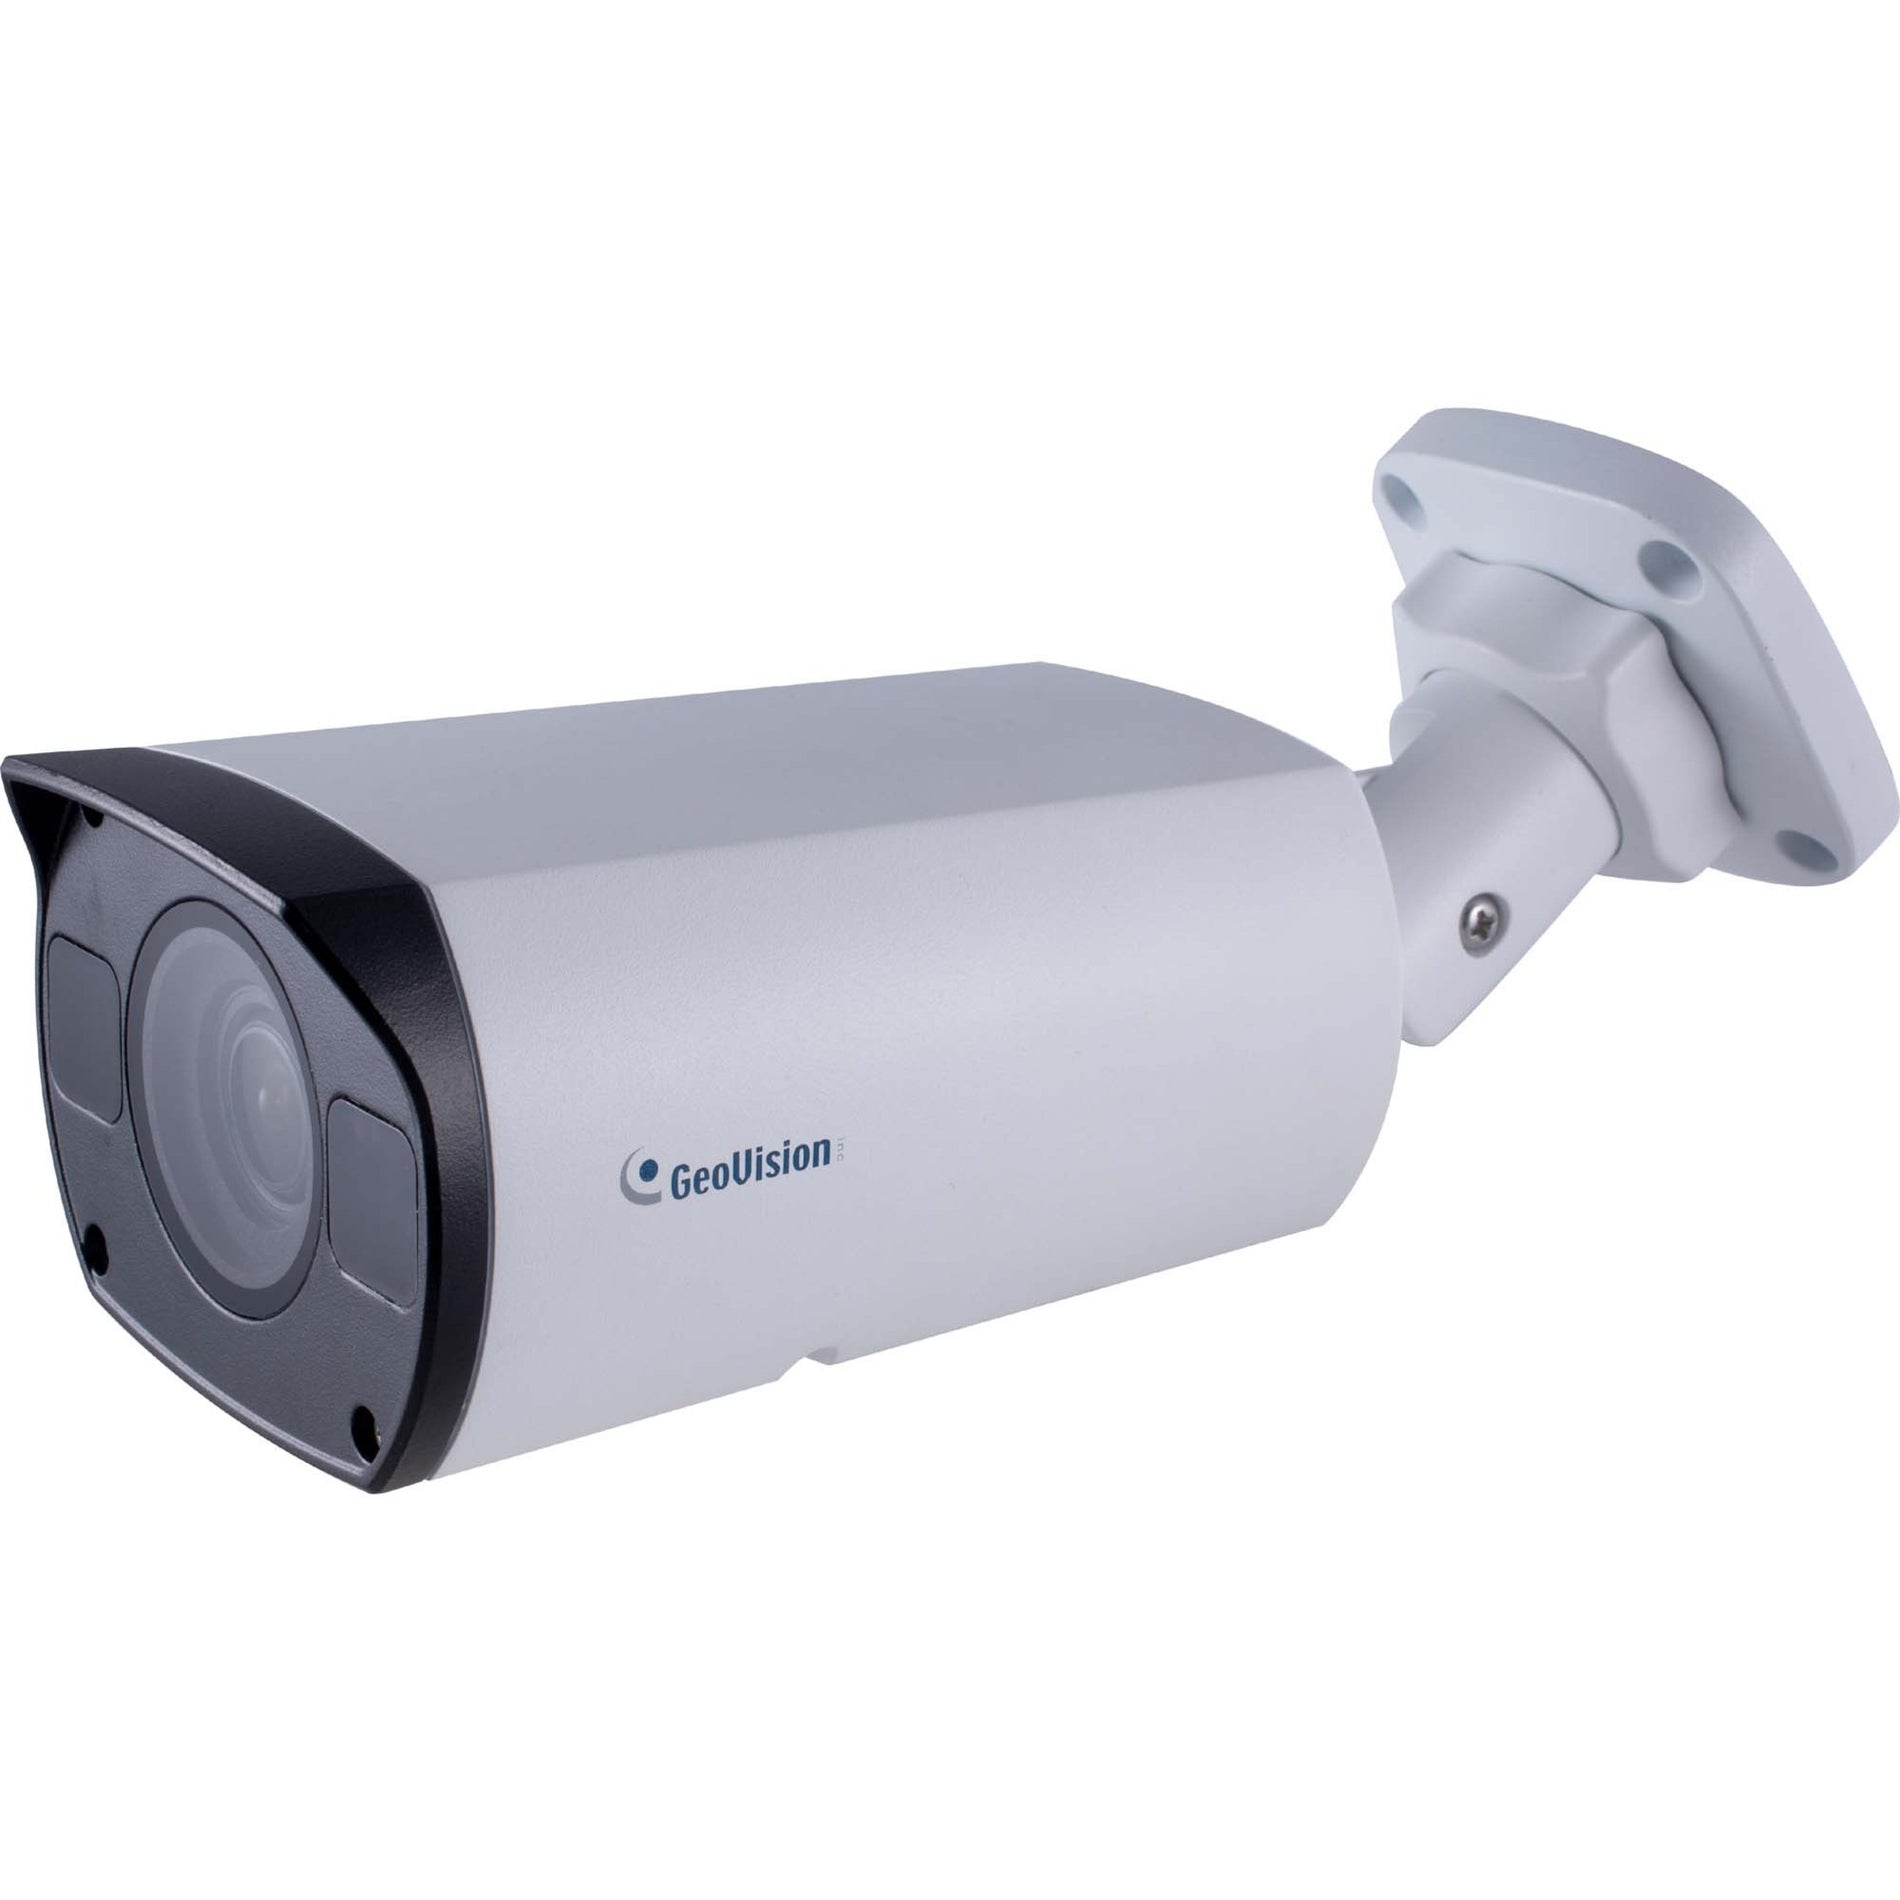 GeoVision 125-TBL4810-000 AI 4MP H.265 5x Zoom Super Low Lux WDR Pro IR Bullet IP Camera, Outdoor